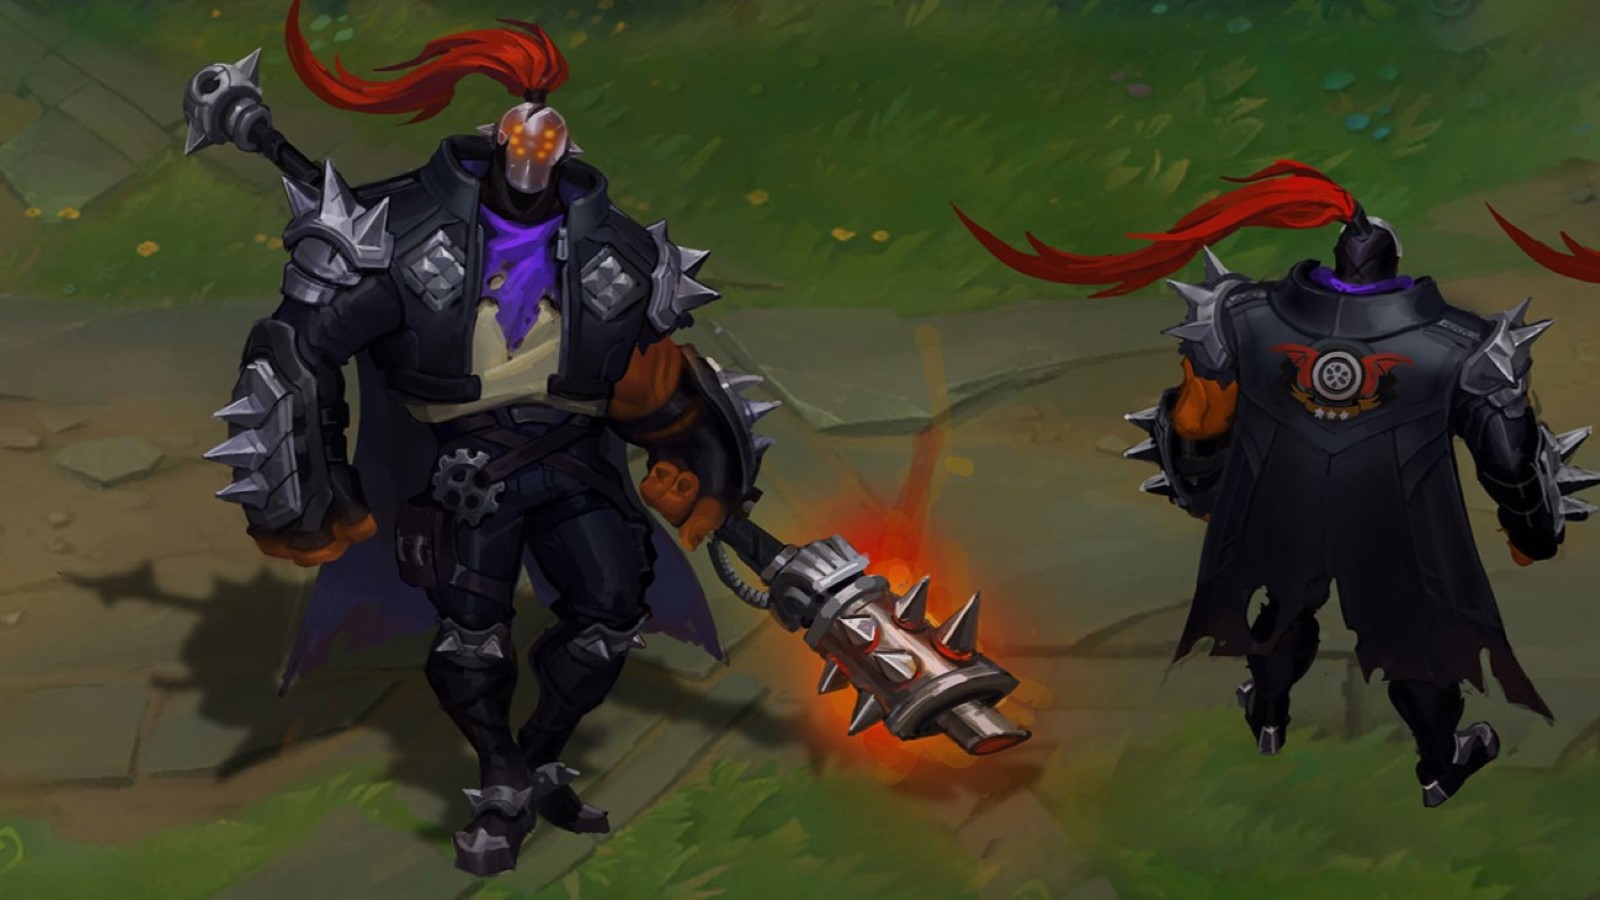 Jax visual update confirmed and coming soon to League of Legends – Dexerto